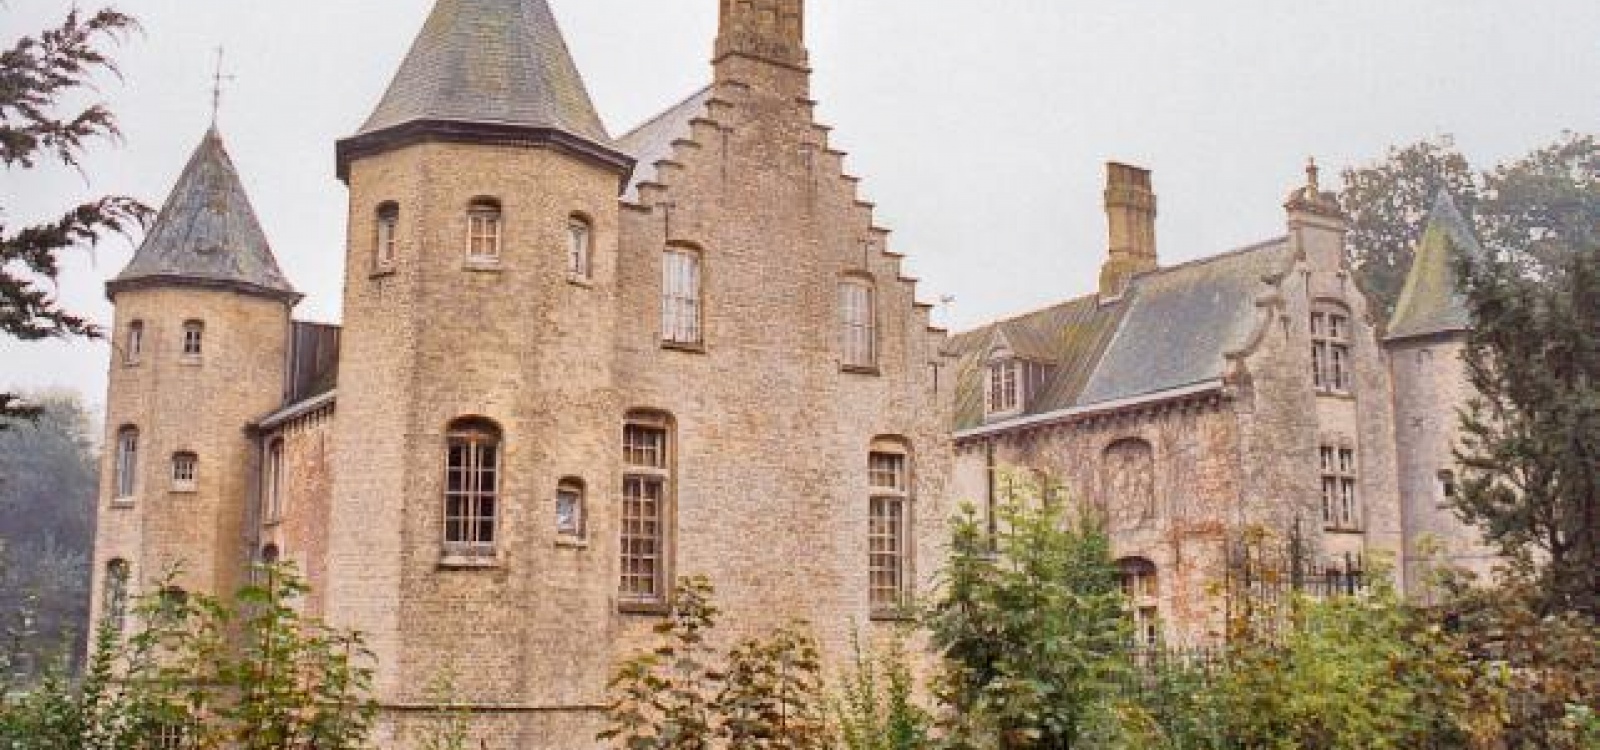 Dunkerque, Nord, France, ,Chateau,A vendre,1025